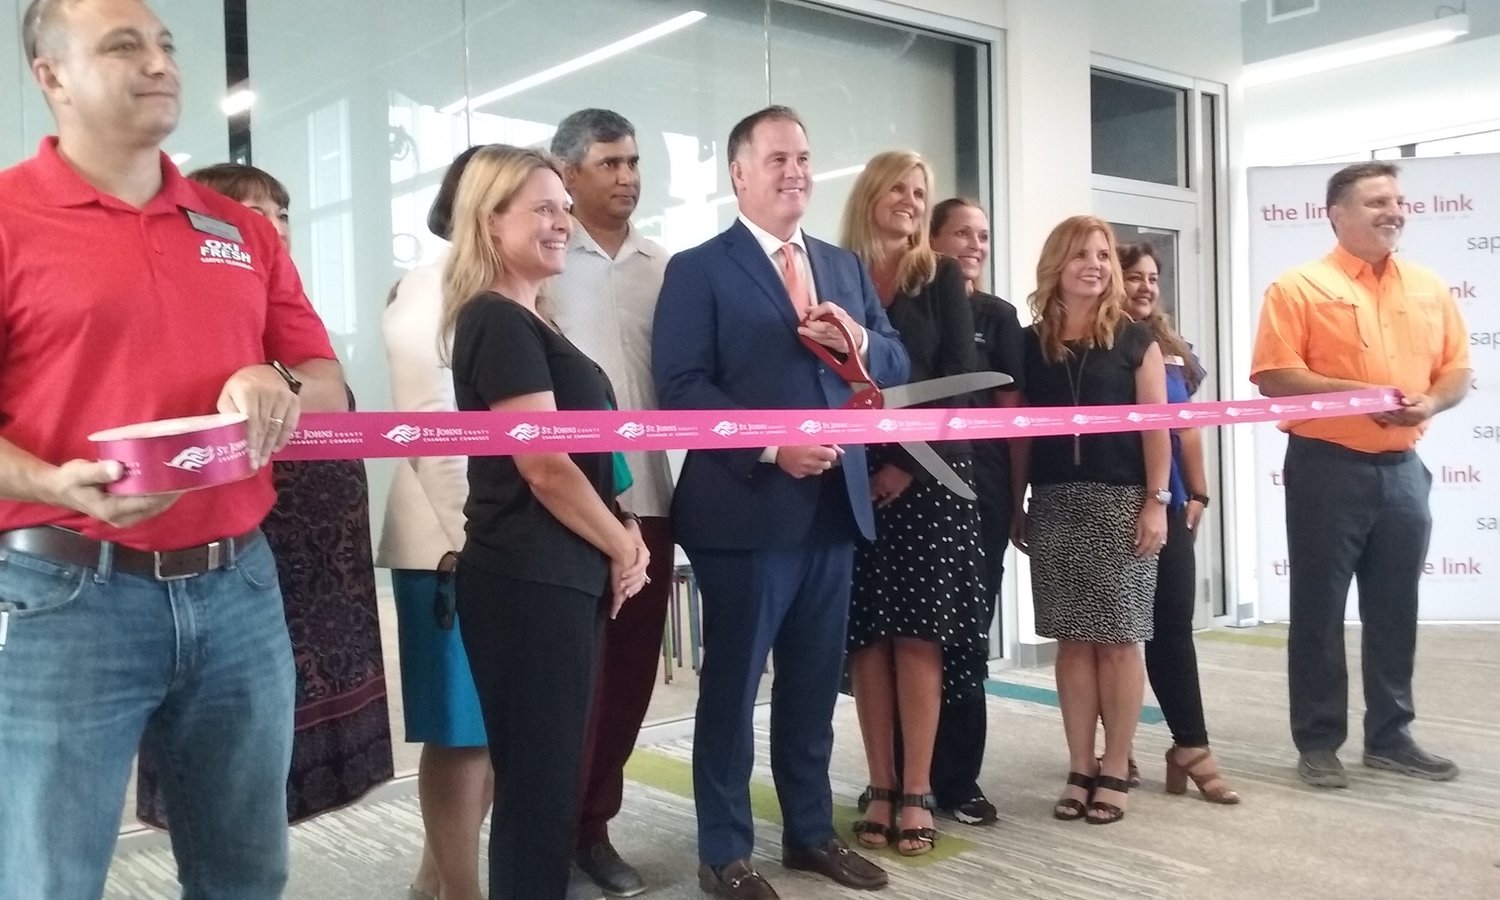 Flagler Health+ President and CEO Jason Barrett cuts the ribbon on the Flagler Health+ Immersive Studio during grand opening festivities for the link on Wednesday, July 14.